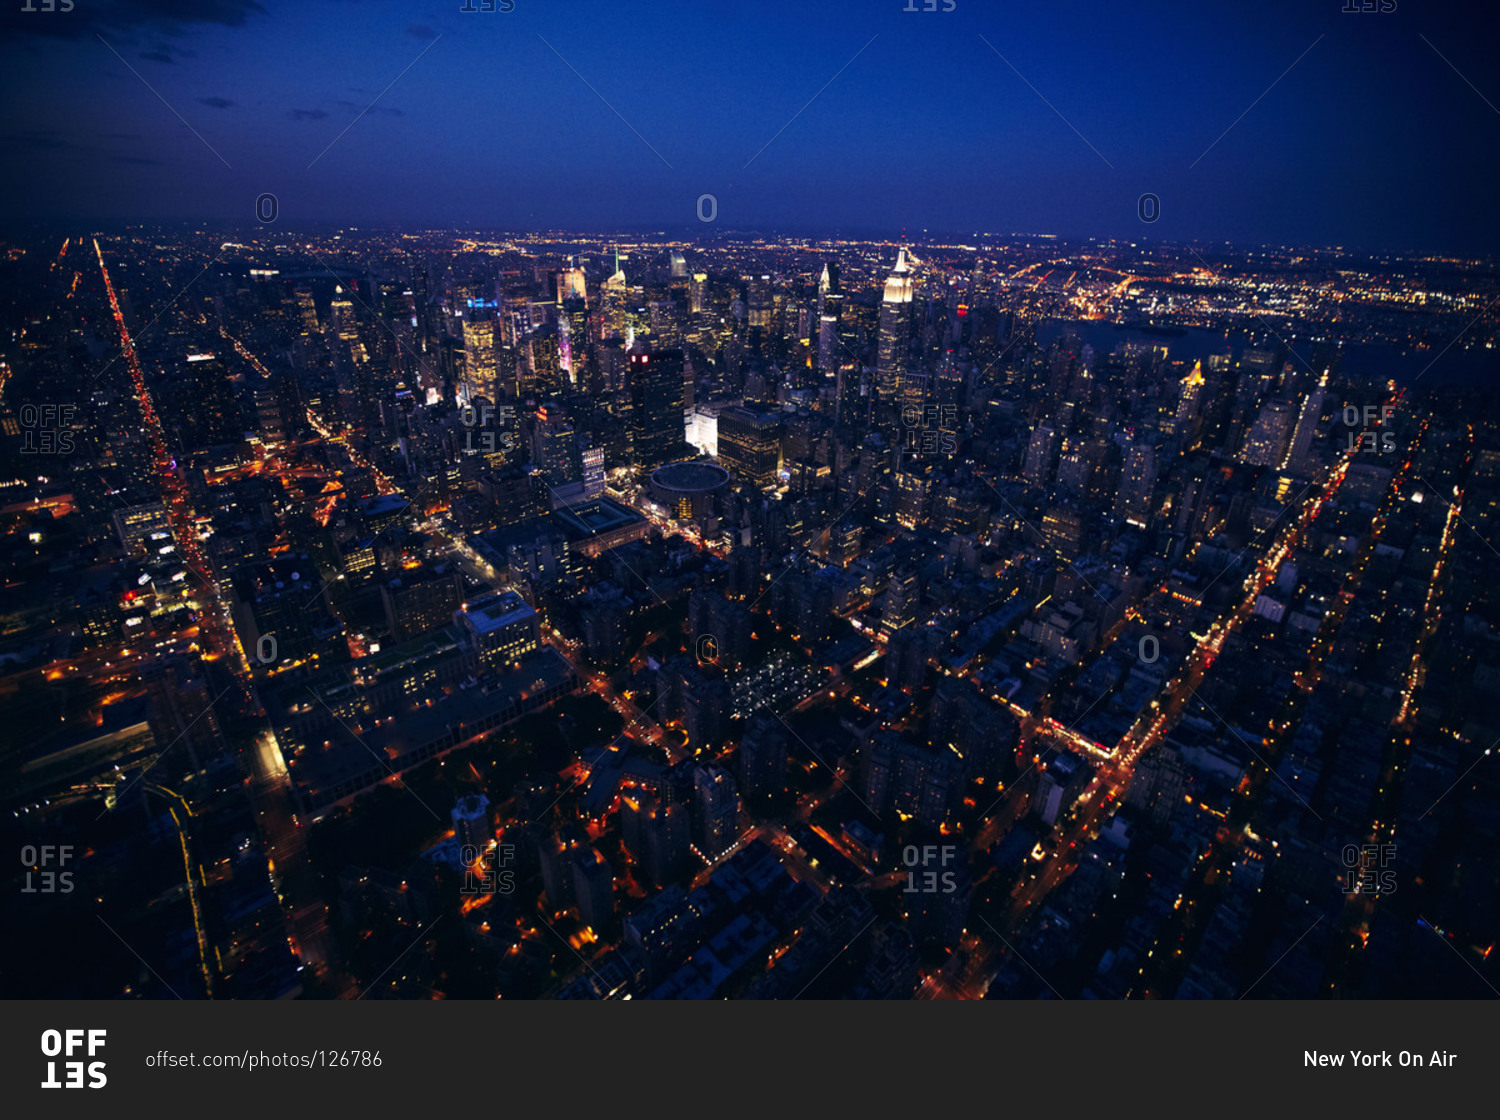 Aerial view of New York City at night, USA